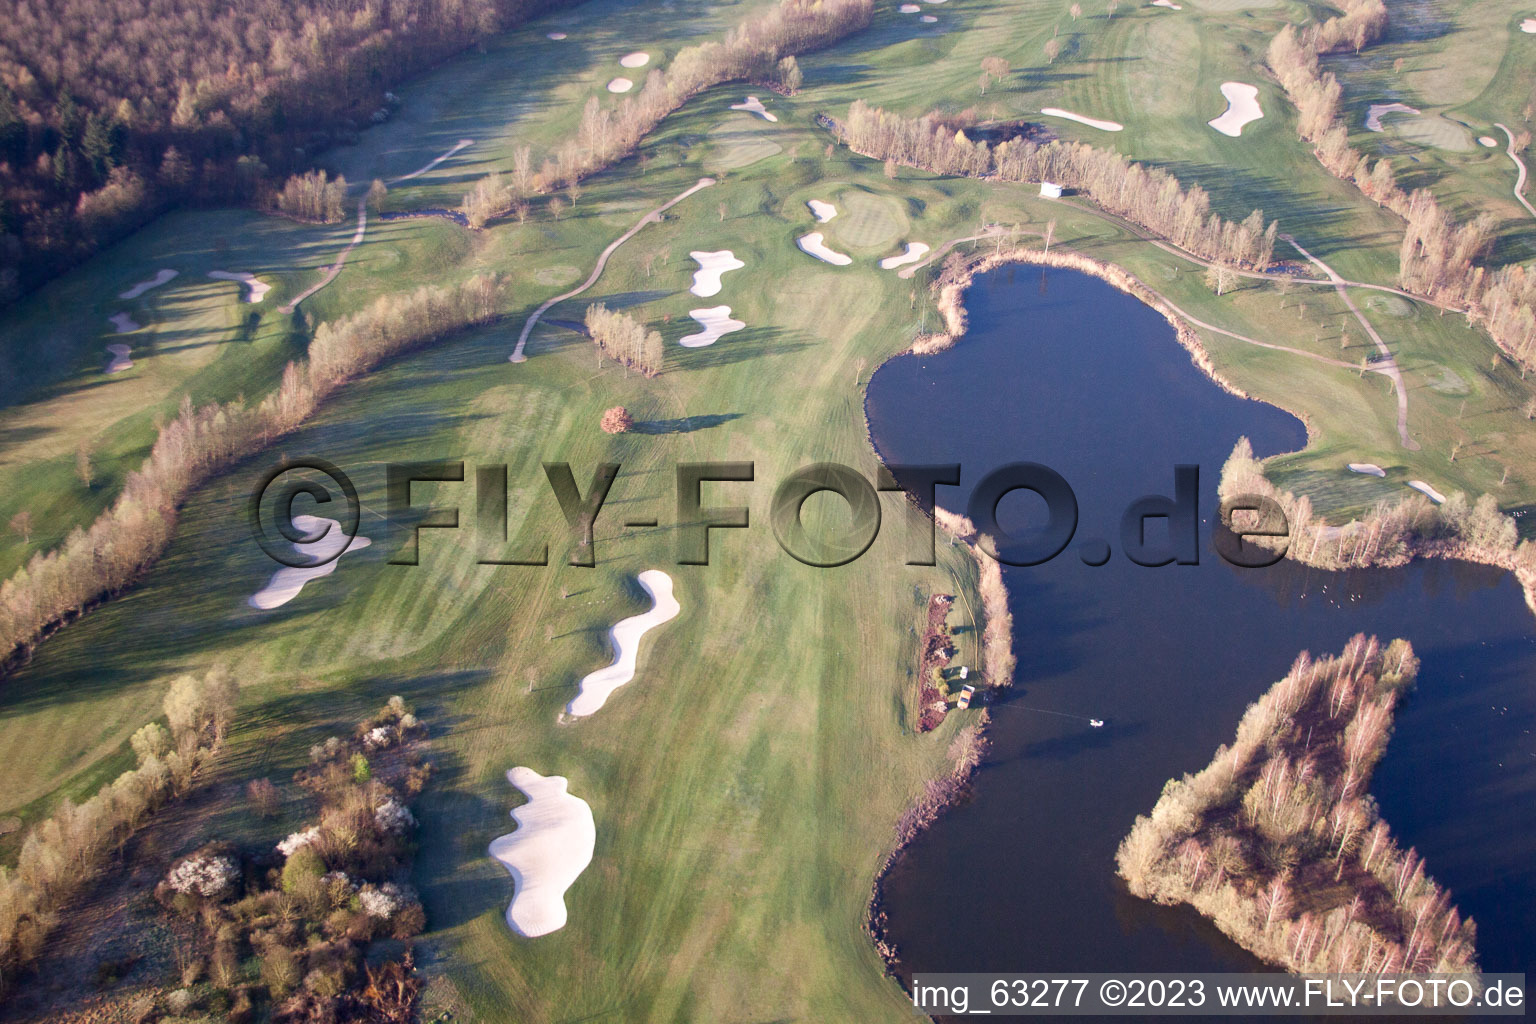 Dreihof Golf Club in Essingen in the state Rhineland-Palatinate, Germany viewn from the air